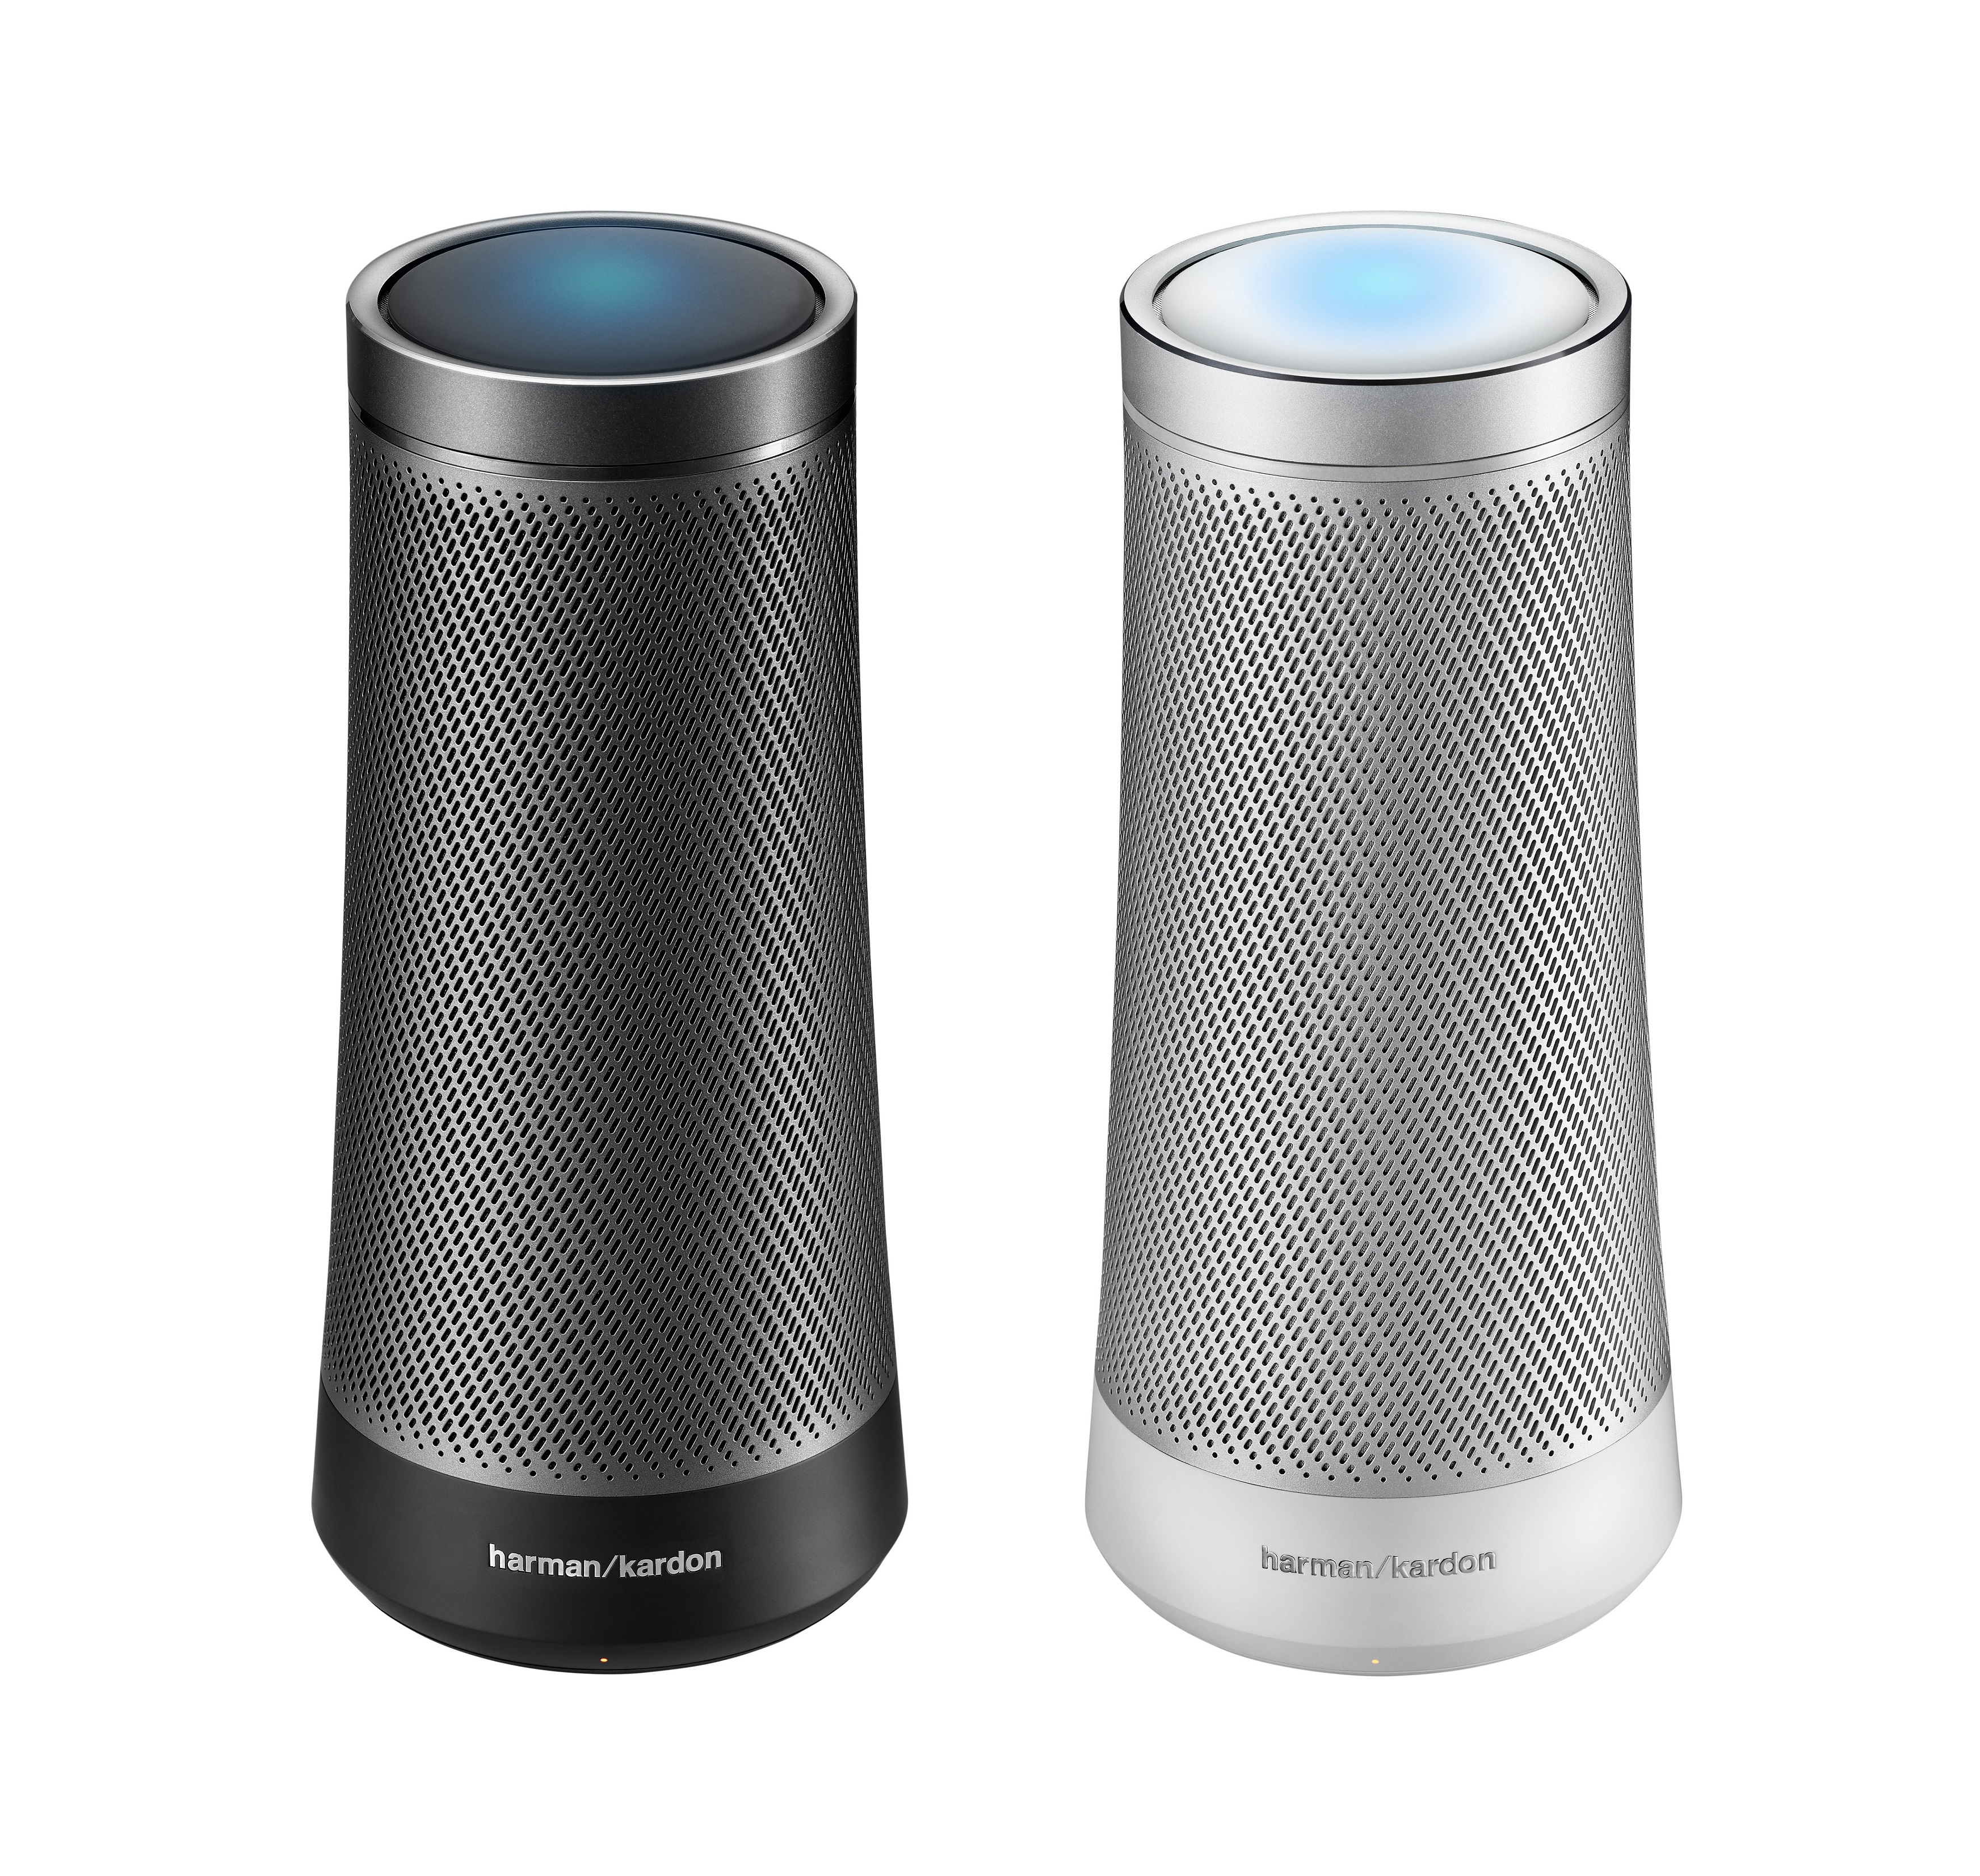 Product shot of two Harman Kardon Invoke speakers on a white background side by side, one is black in color and the other is white.